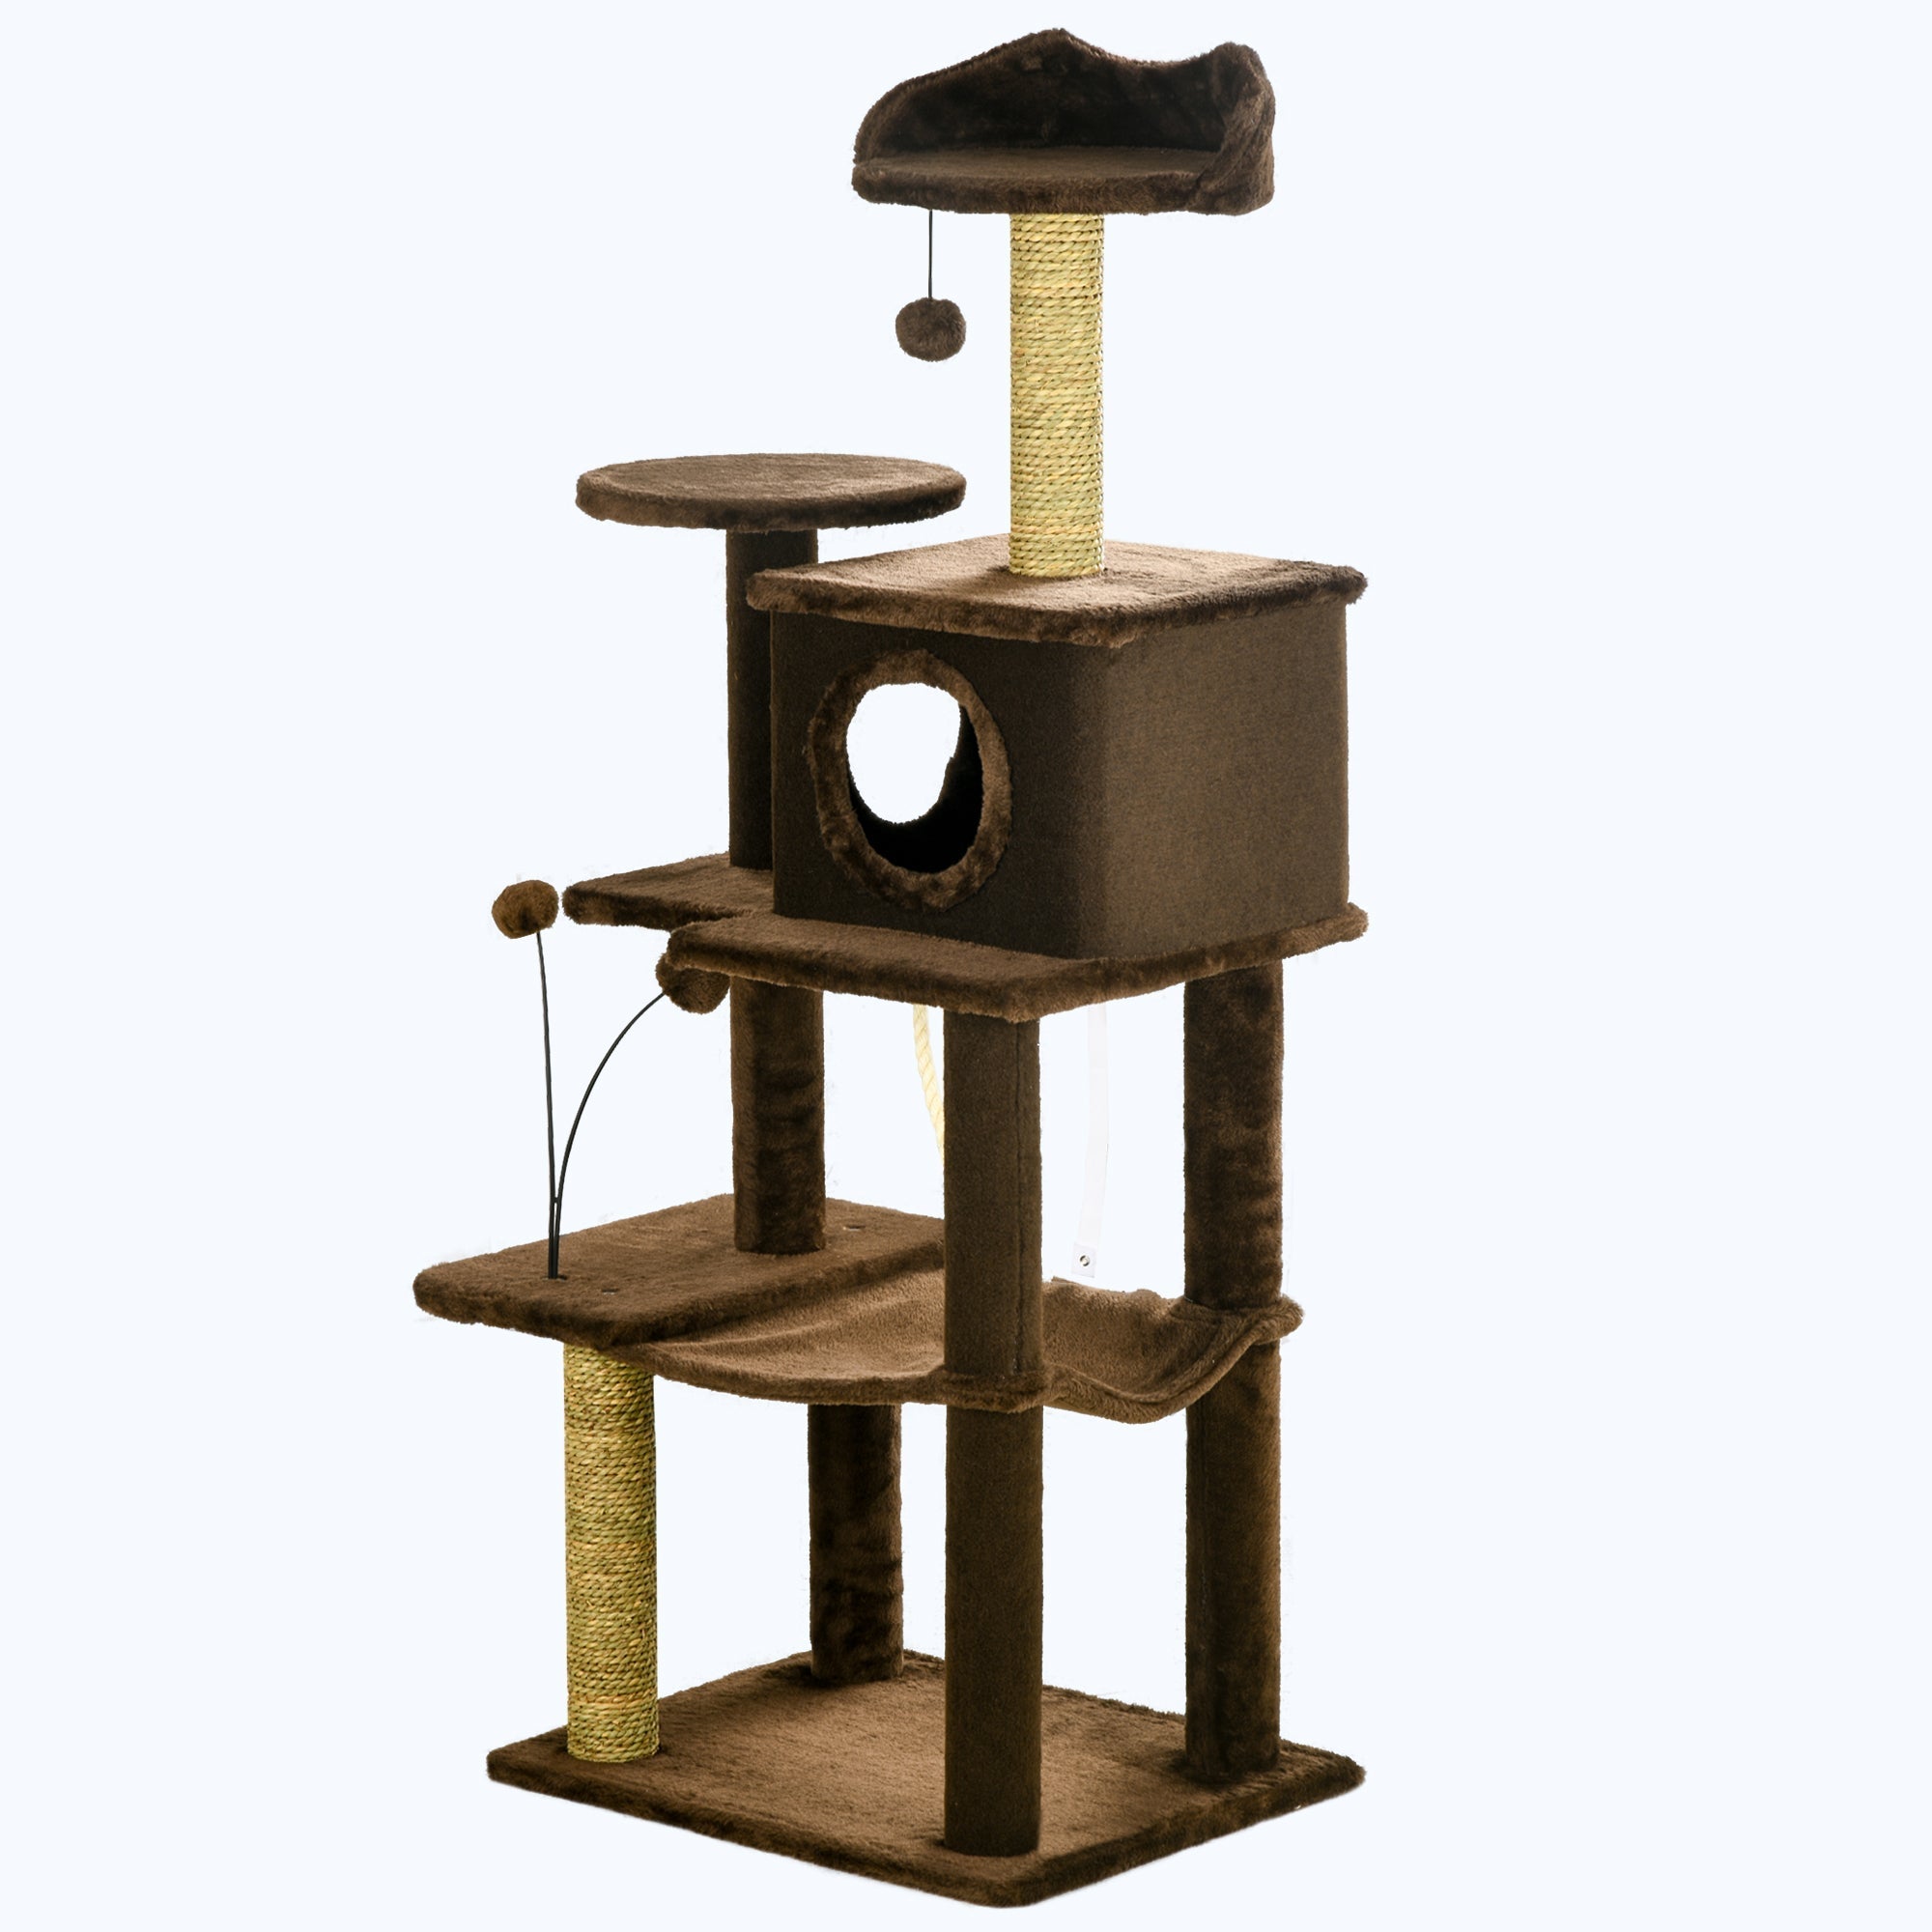 136cm Cat Tree for Indoor Cats, Modern Cat Tower with Scratching Posts, house, Platforms, Toy Ball - Brown, PawHut,